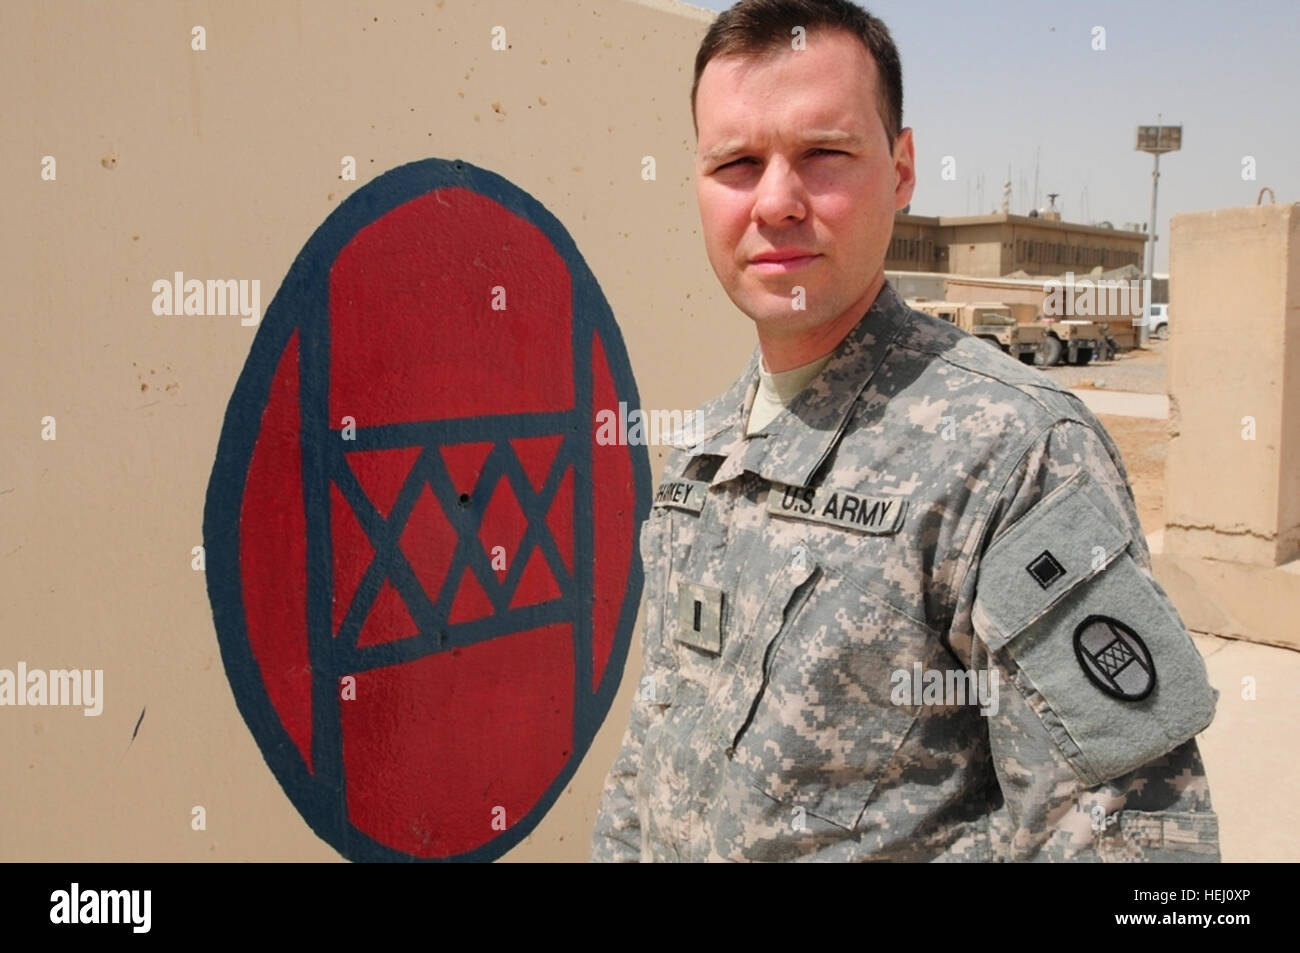 First Lt. Scott Sharkey of the Colorado Army National Guard's 86th Military Intelligence Company stands in front of a painted 30th Heavy Brigade Combat Team patch at Forward Operating Base Falcon July 25. The patch, the combat version of which can be seen on Sharkey's left sleeve, dates back to the founding of the 30th Infantry Division in 1917. Sharkey's grandfather, Allen, was attached to the division in World War II and earned a Bronze Star with 'V' device for valor while with the unit.   Scott wasn't aware that his grandfather had served with 'Old Hickory,' as the then-division and current Stock Photo